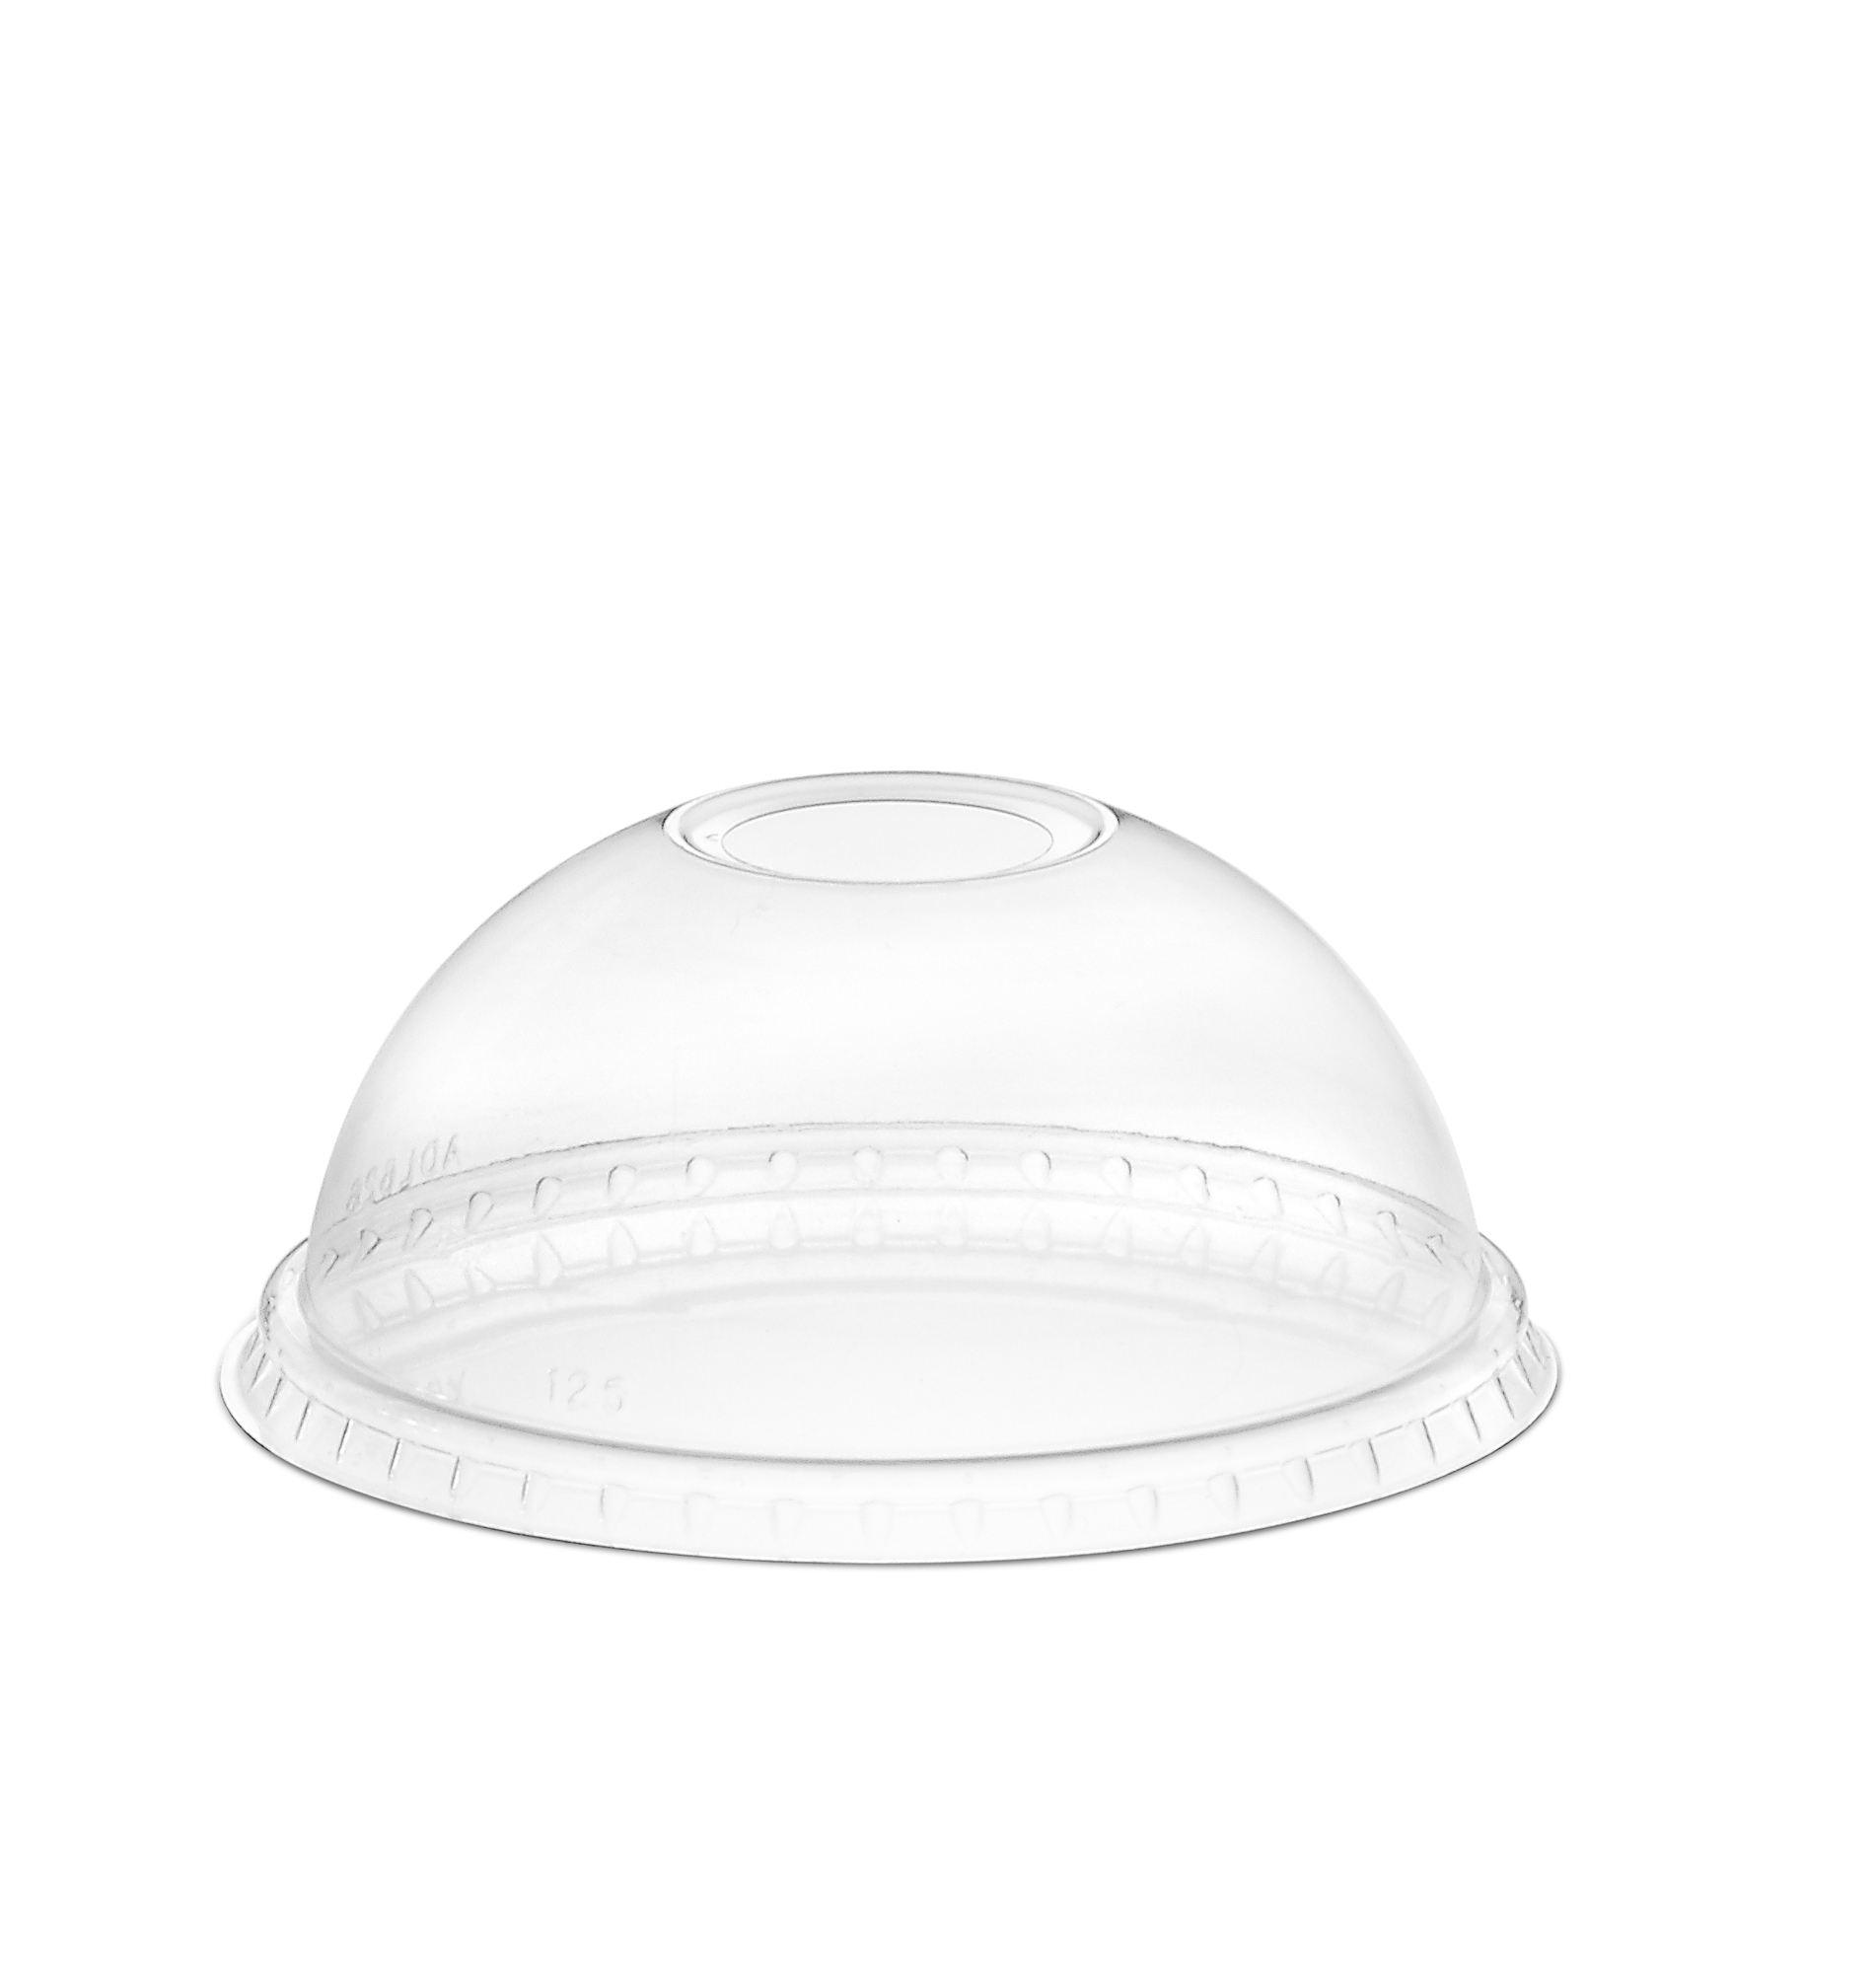 isolated clear drinking cup dome lid with straw hole